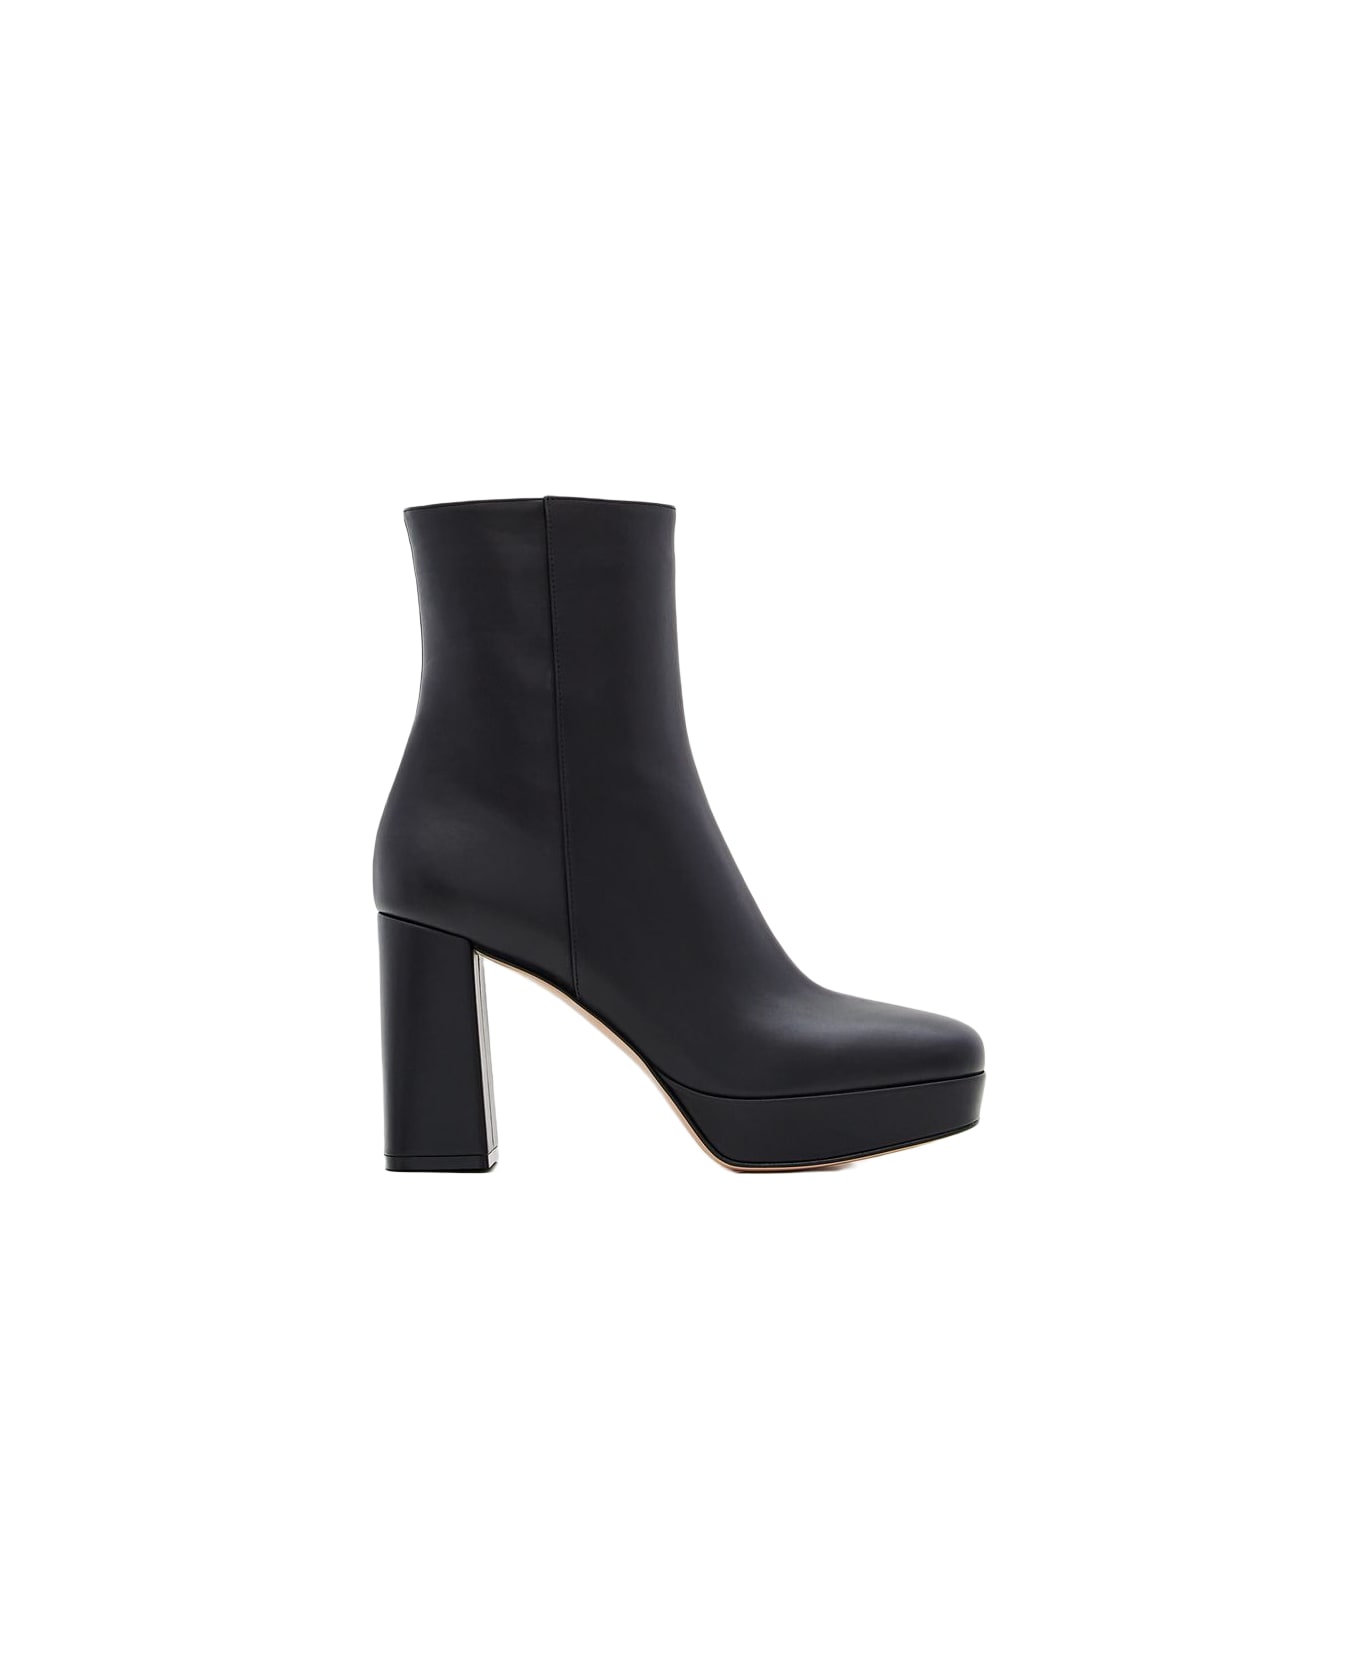 Gianvito Rossi Daisen Heeled Leather Boots - Black